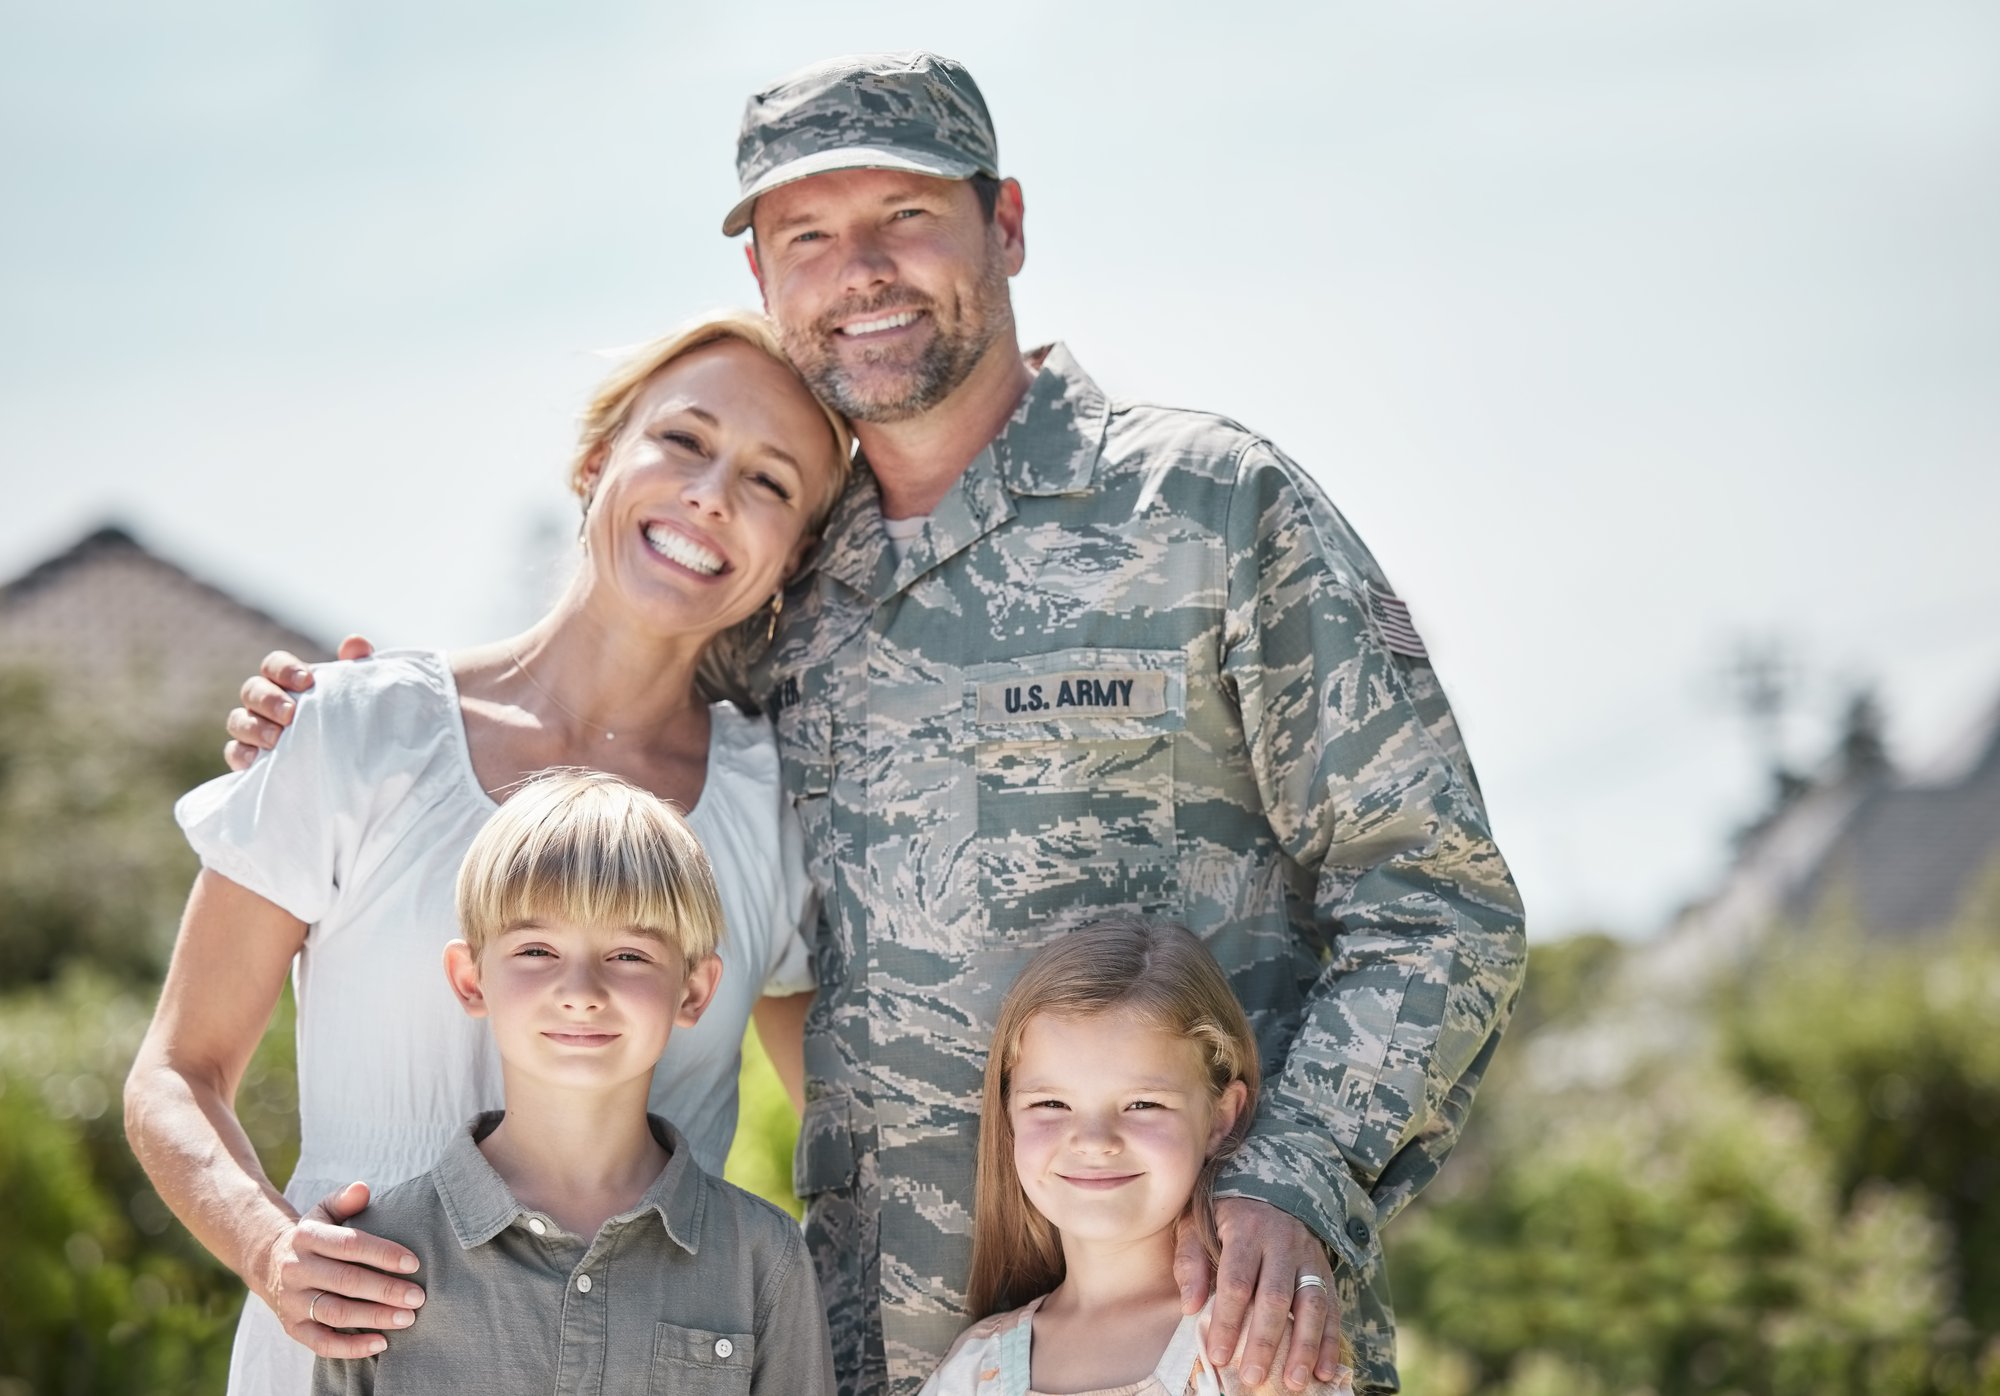 shot-of-returning-soldier-standing-with-his-family-2023-11-27-05-23-54-utc